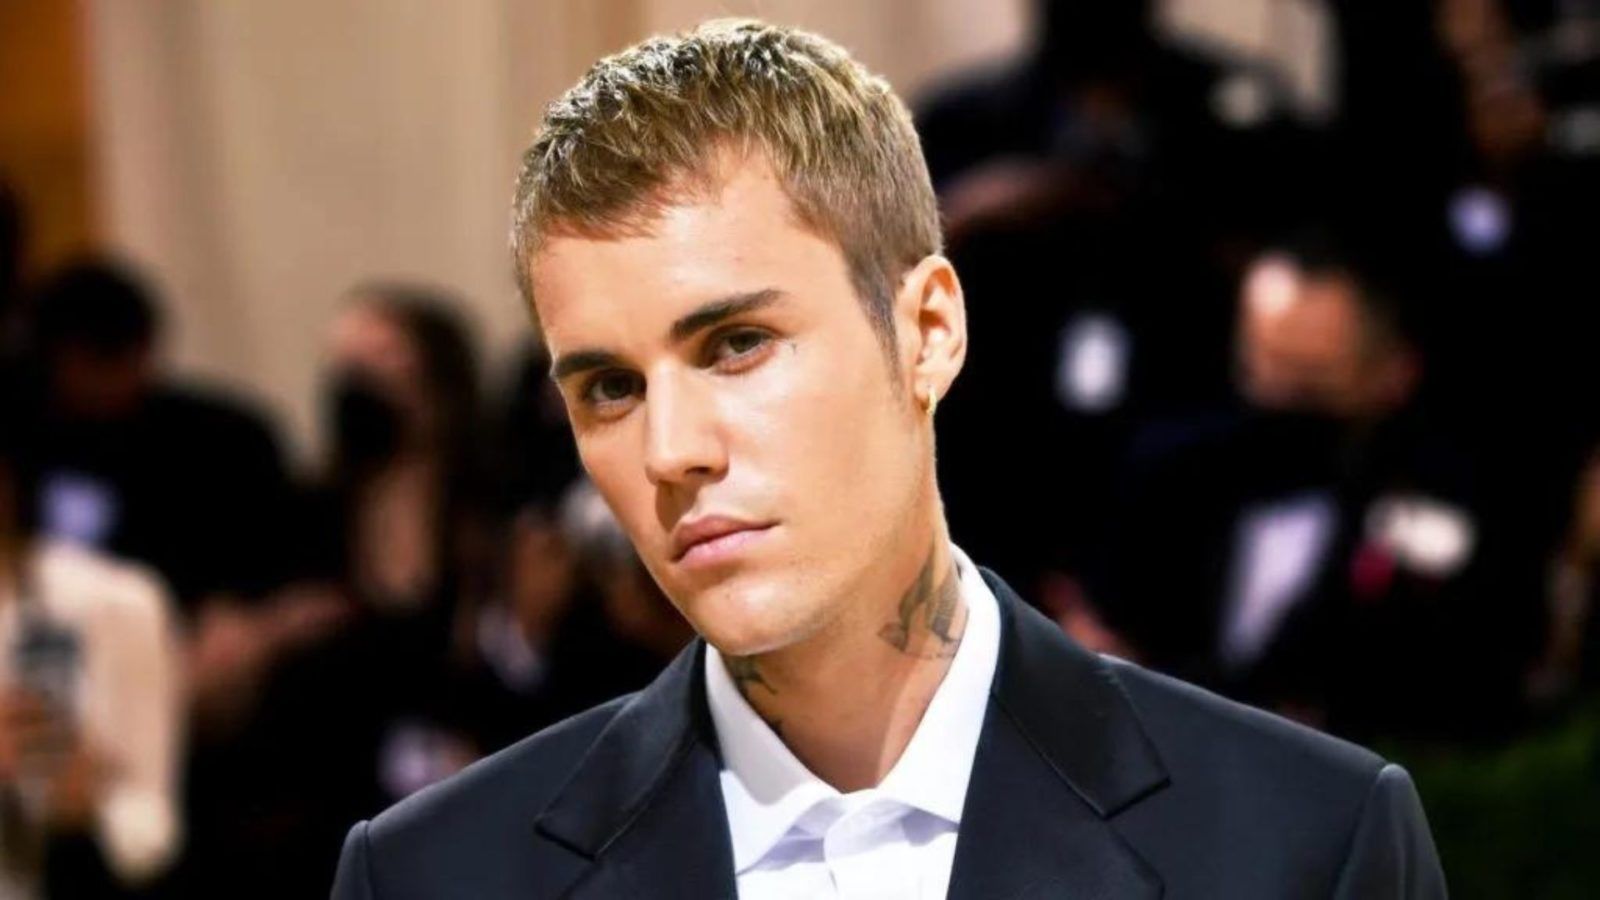 How do you get Ramsay Hunt syndrome? Justin Bieber’s condition, explained